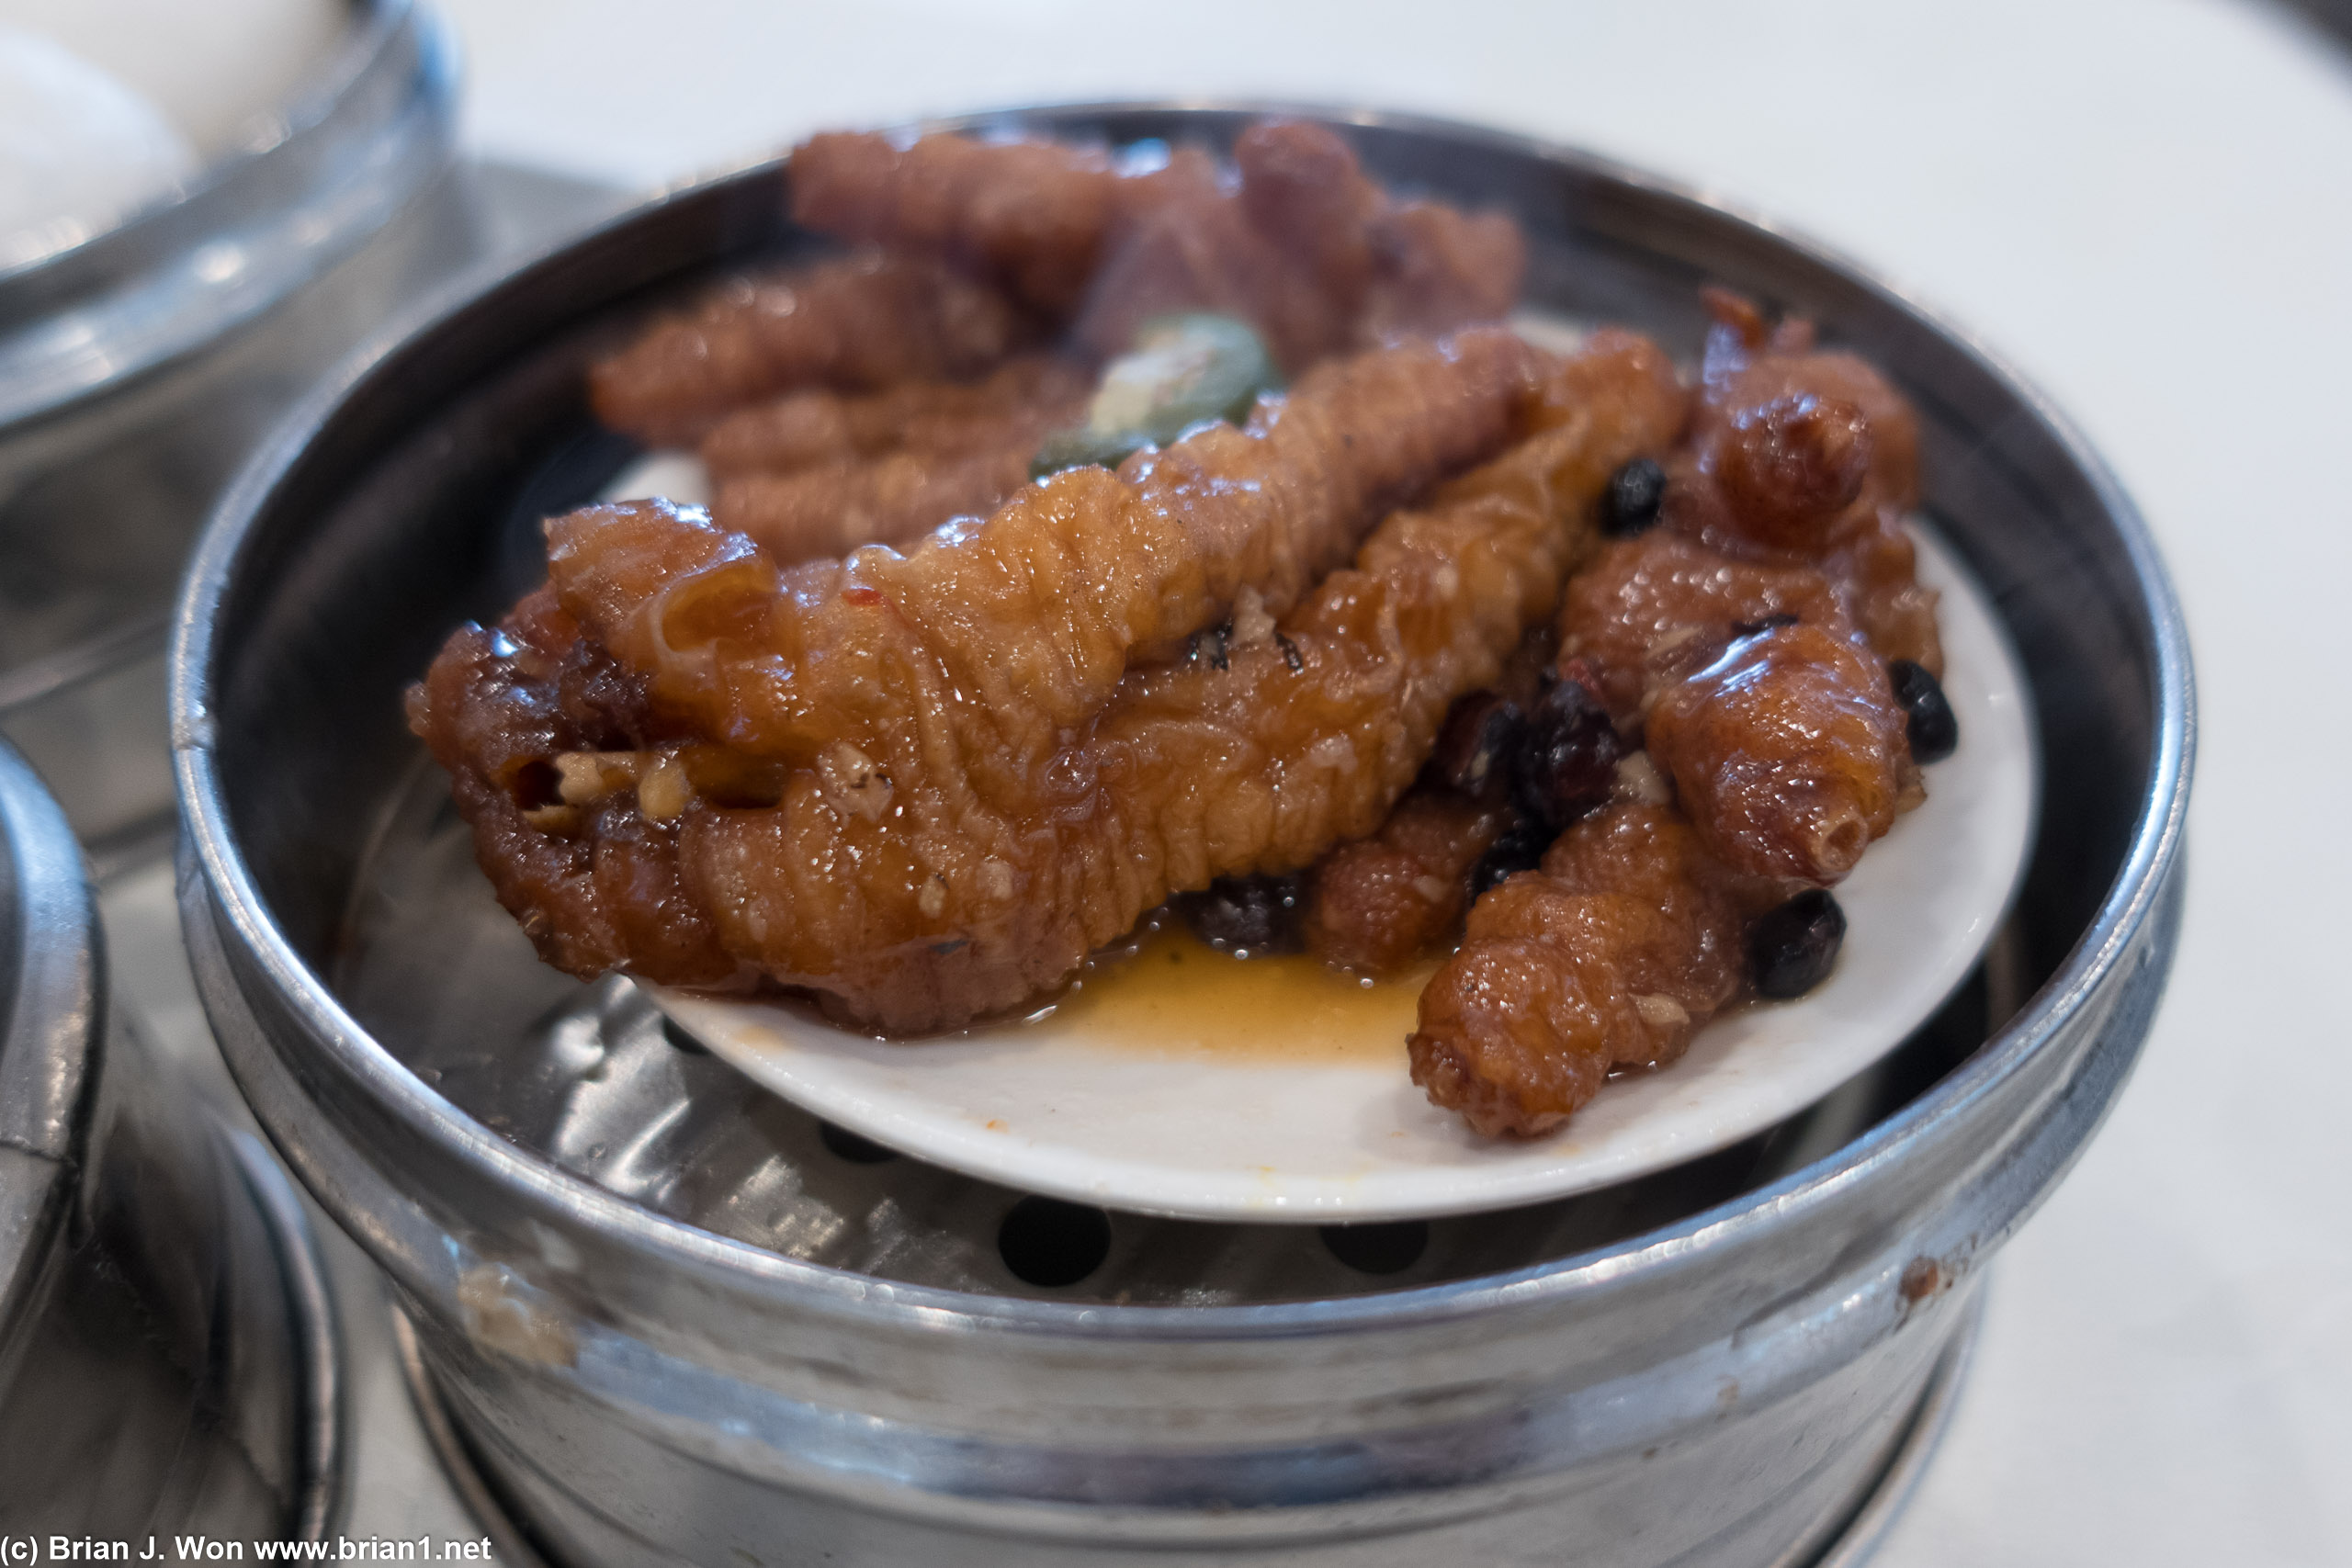 Feng zhao (chicken feet). Also excellent.